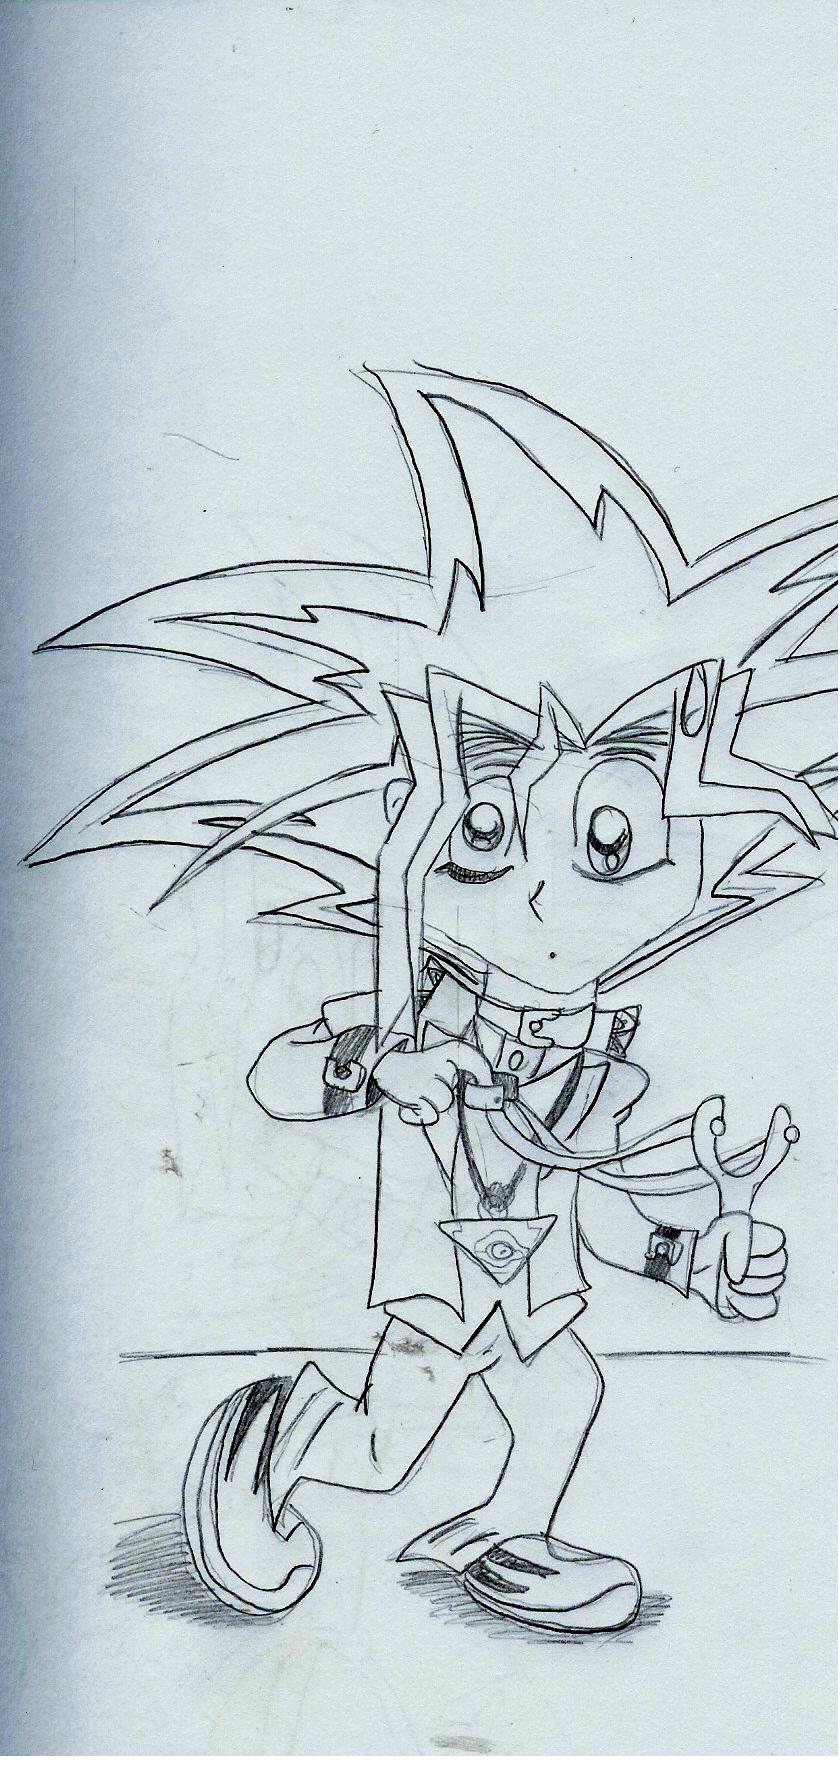 Yugi's nasty deeds # 1 by Knuckles_prower168